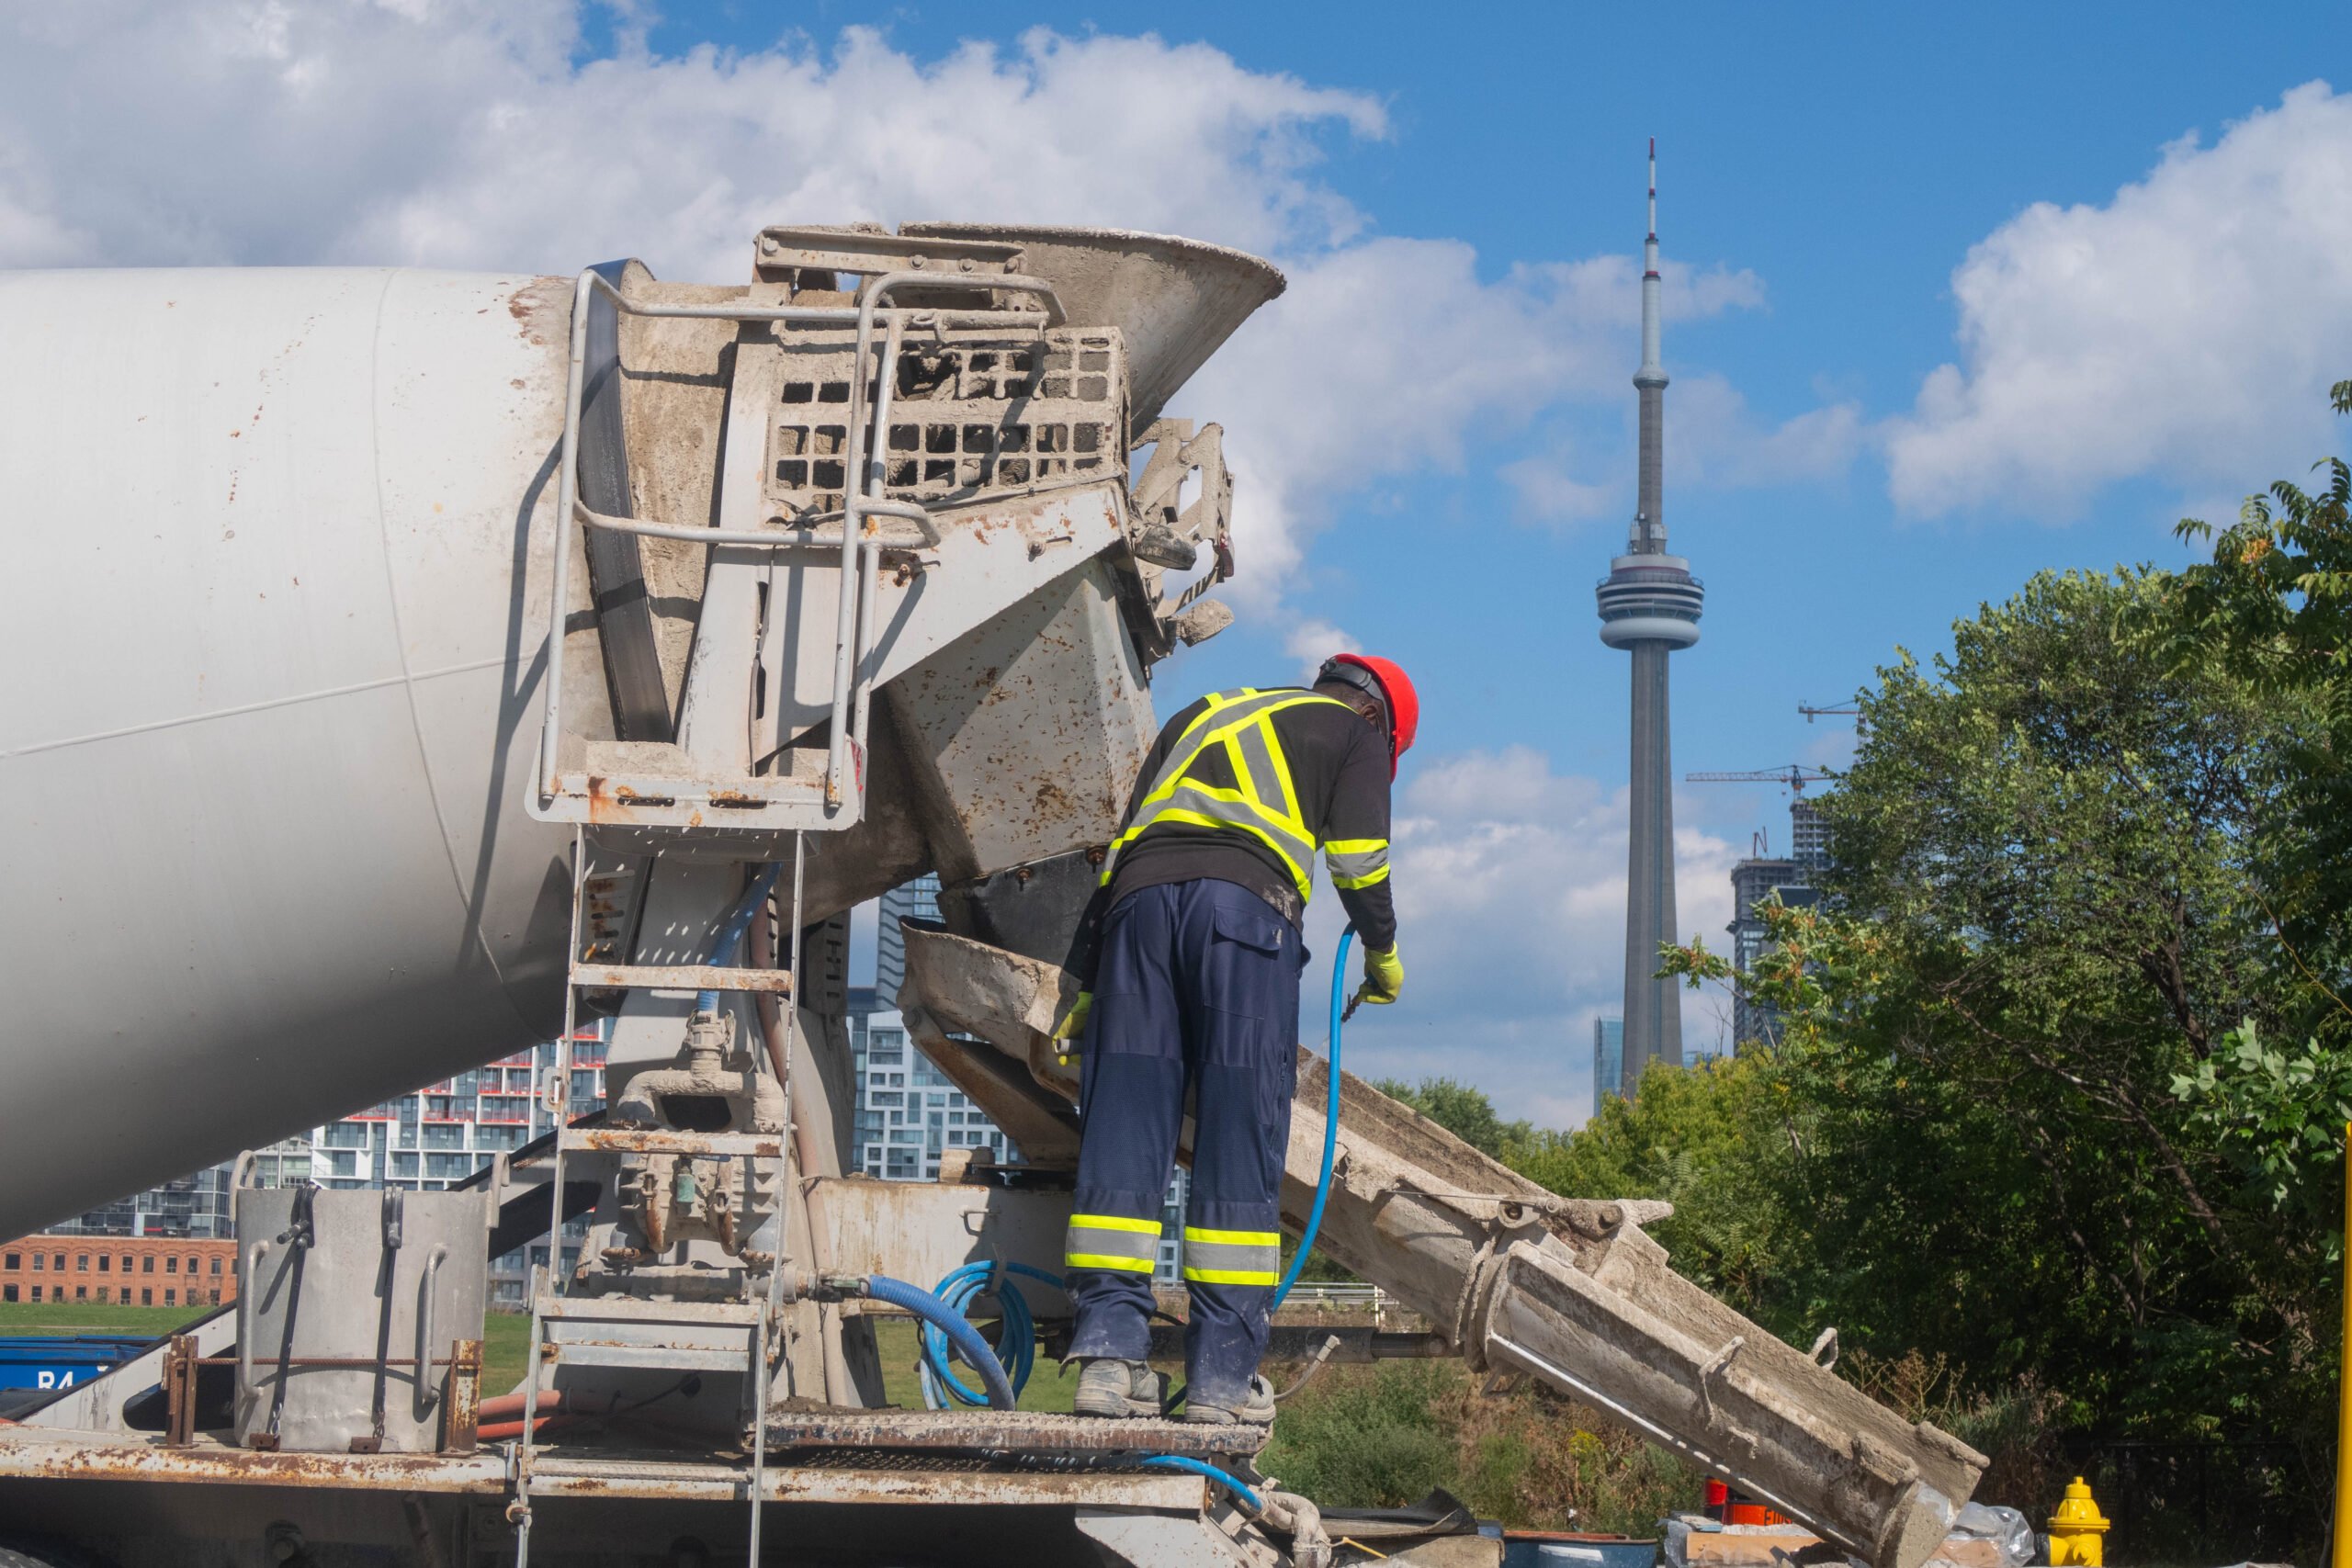 Construction worker cleaning cement truck in front of Toronto CN Tower.